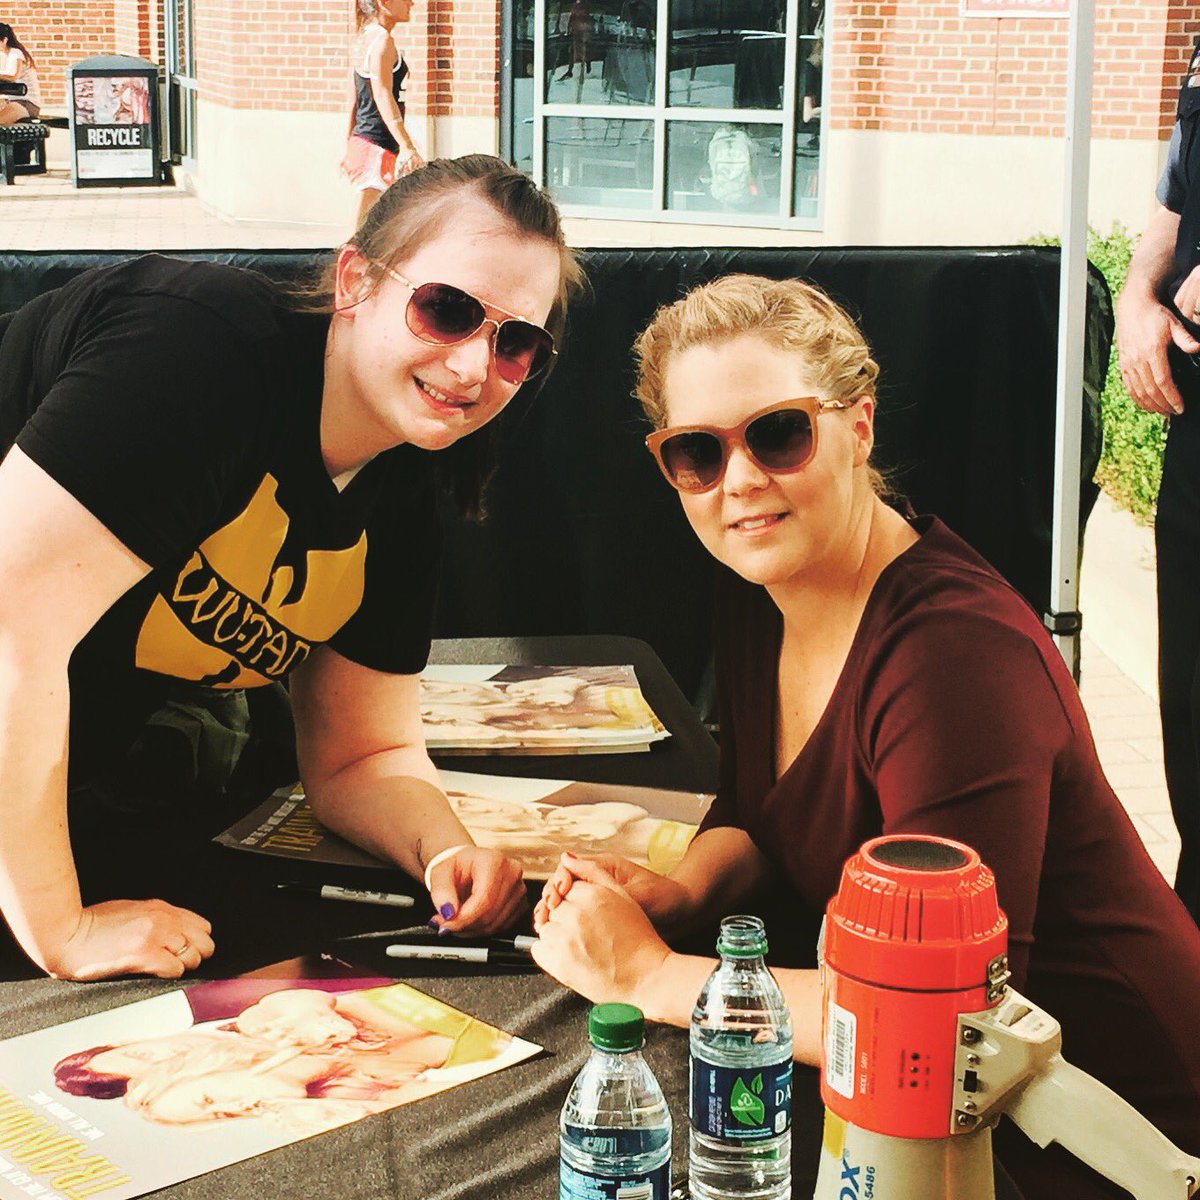 RT @sarahewynn: @maddyyypryor @amyschumer right before I gave her an @OhioState shirt. She did give props for the #wutang shirt too https:/…